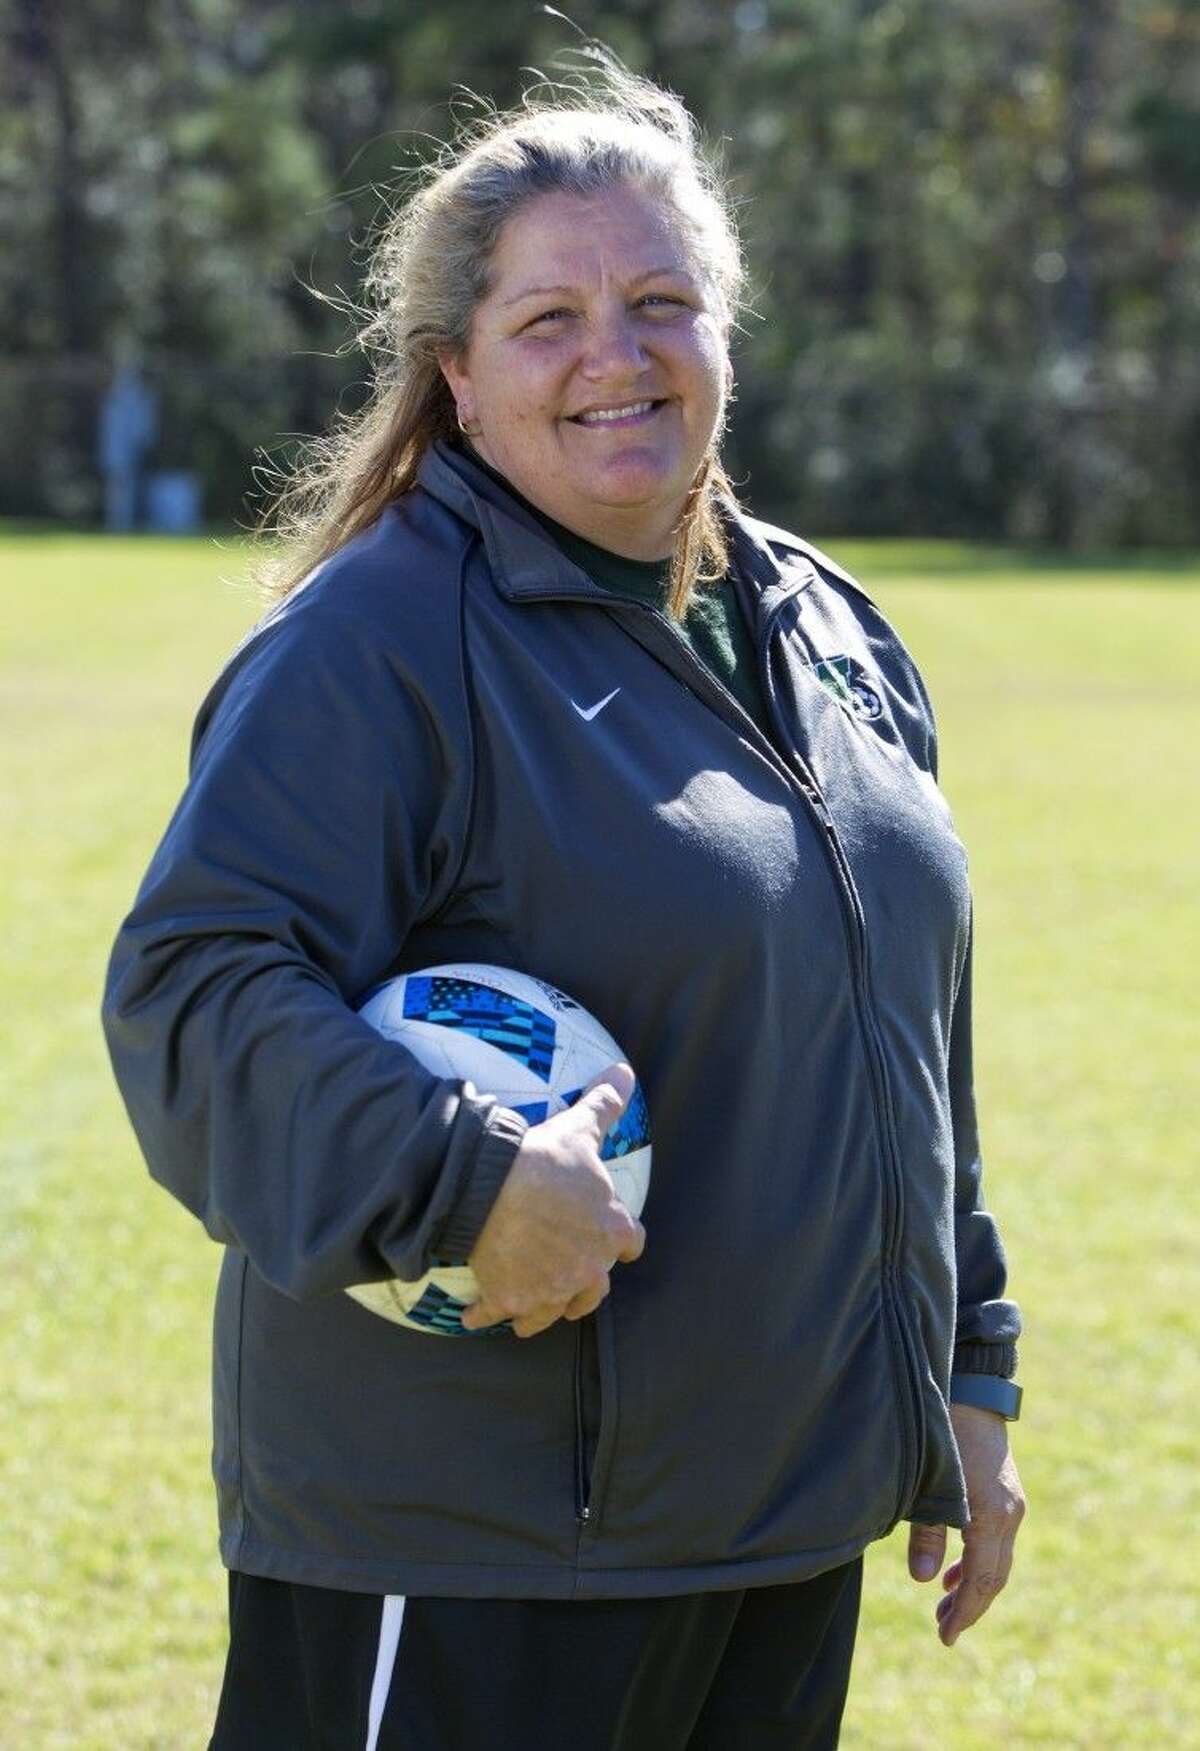 Dina Graves was named District 16-6A Co-Coach of the Year.